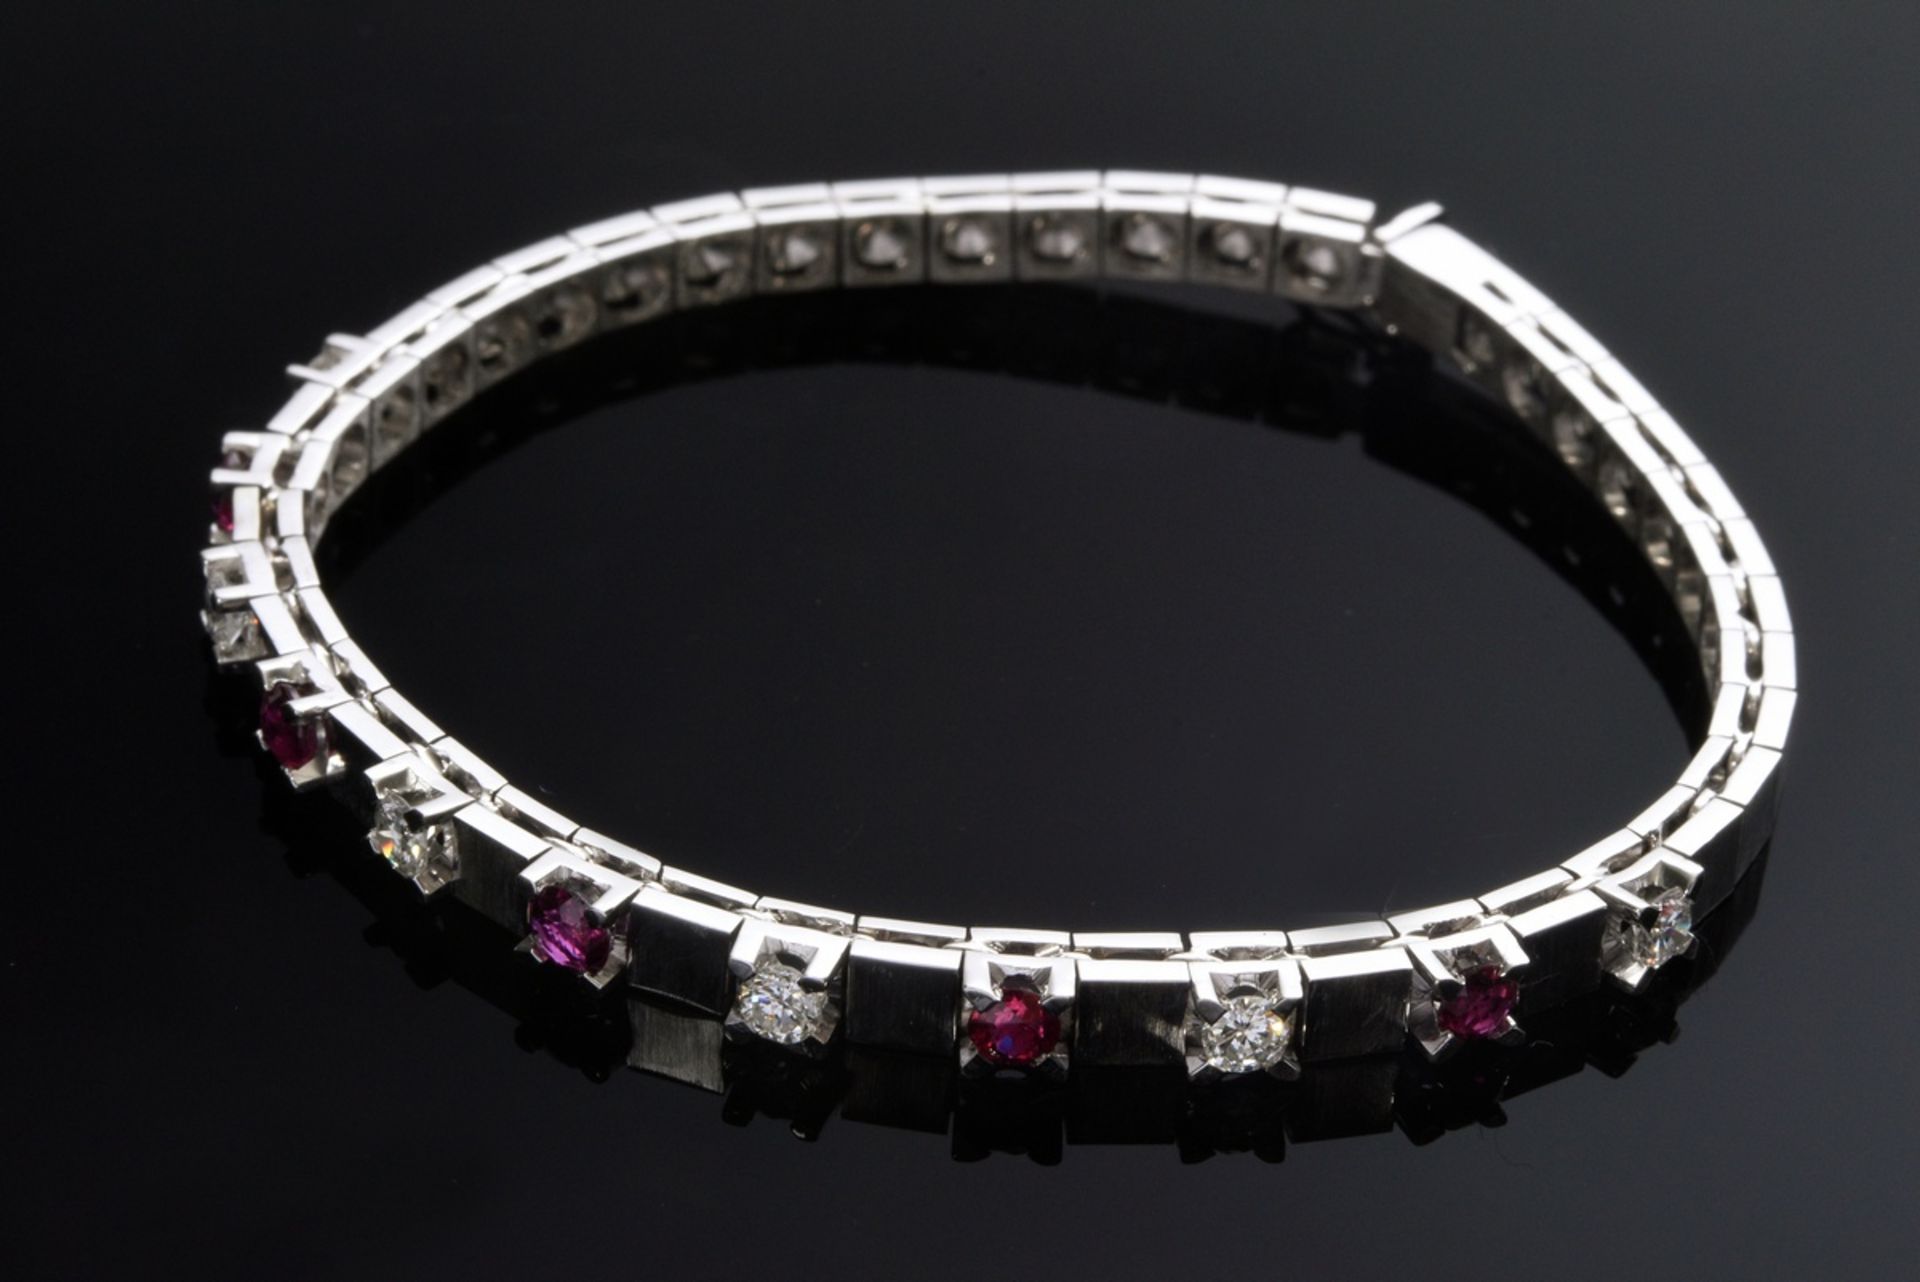 Satin-finished 750 white gold bracelet with alternating rubies (total approx. 0.50ct) and brilliant